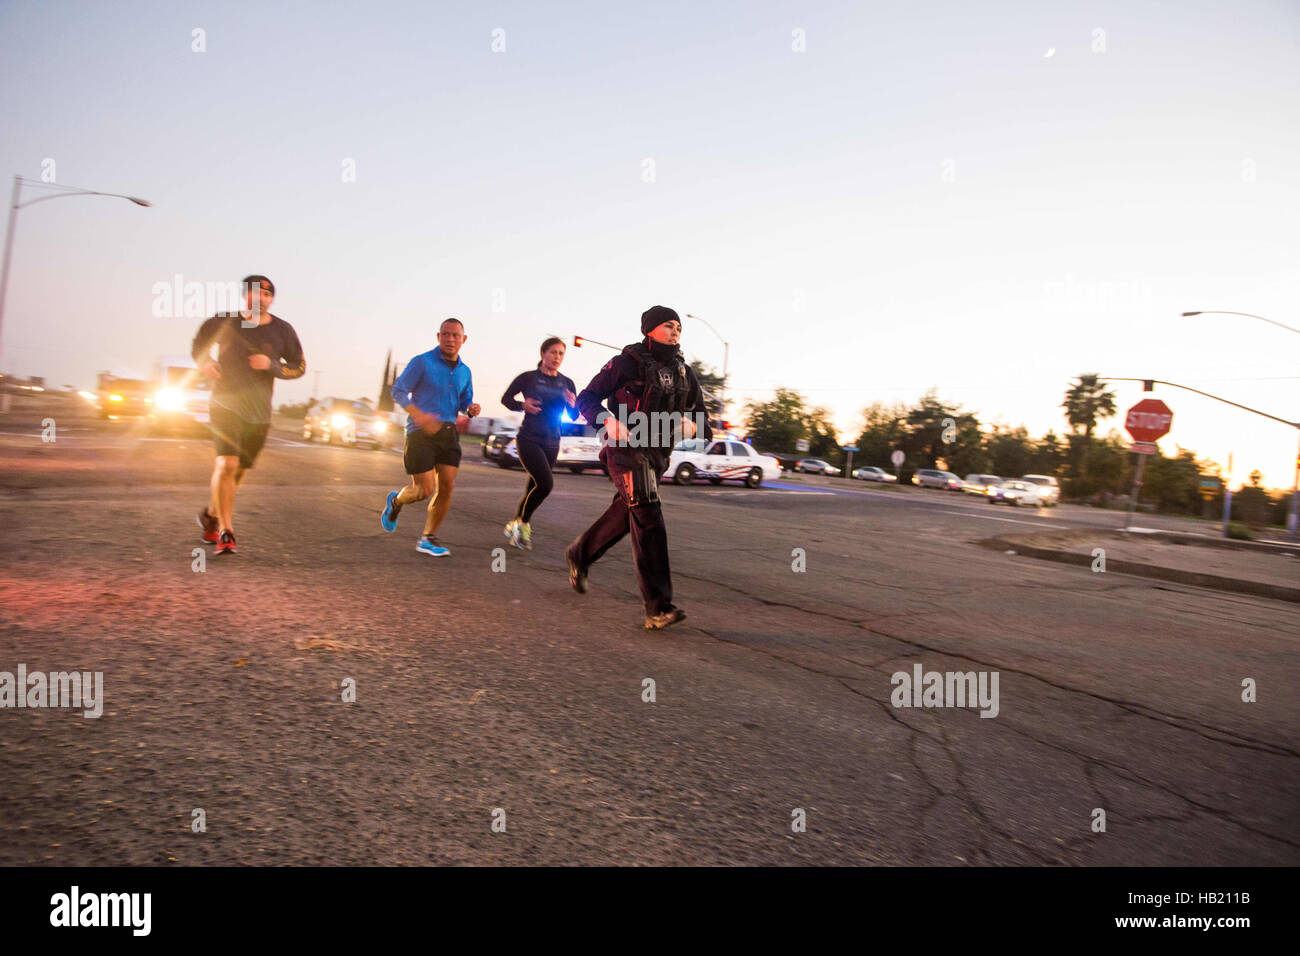 Turlock, CA, USA. 3rd Dec, 2016. Stanislaus County Sheriff along with Turlock Police Department escorted and blocked the roads for Los Angeles Police Officer Kristina Tudor as she runs down Golden State Blvd. south of Turlock California Saturday Saturday Dec. 3rd 2016 evening on her and Officer Joe Cirrito 420 mile run to Sacramento California from Los Angeles. The run is to raise awareness, funds and to honor the officers killed in the line of duty. Along with the families of officers killed in the line of duty. © Marty Bicek/ZUMA Wire/Alamy Live News Stock Photo